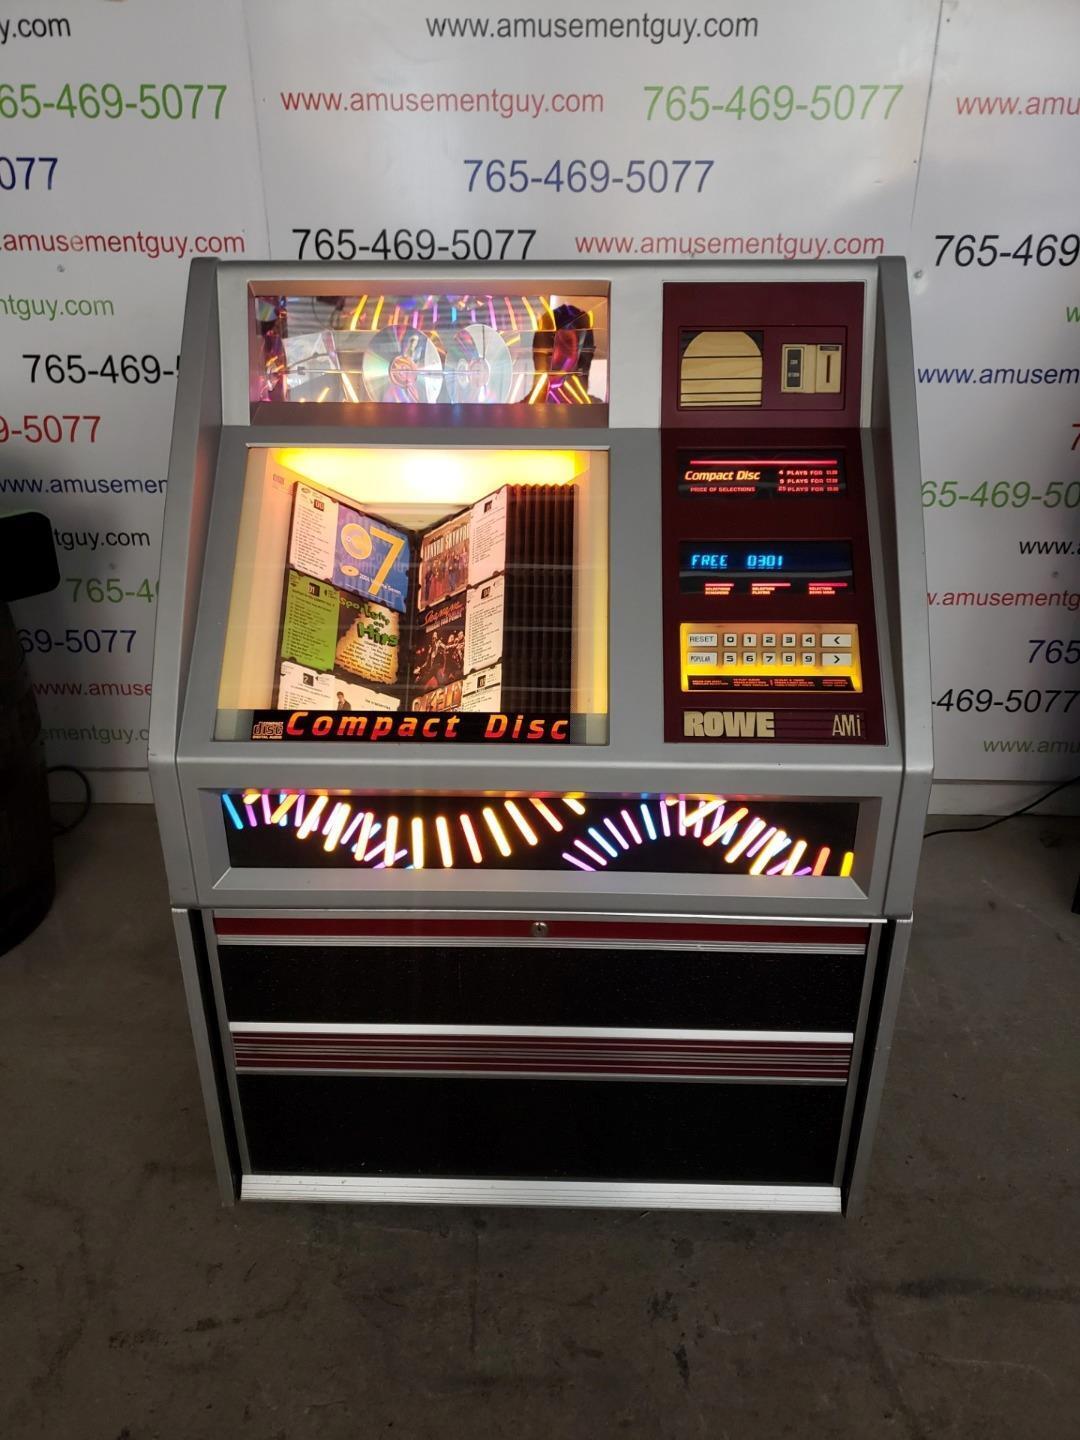 Rowe AMI CD 51 Jukebox- Includes Some Demo CDs and Bluetooth Audio